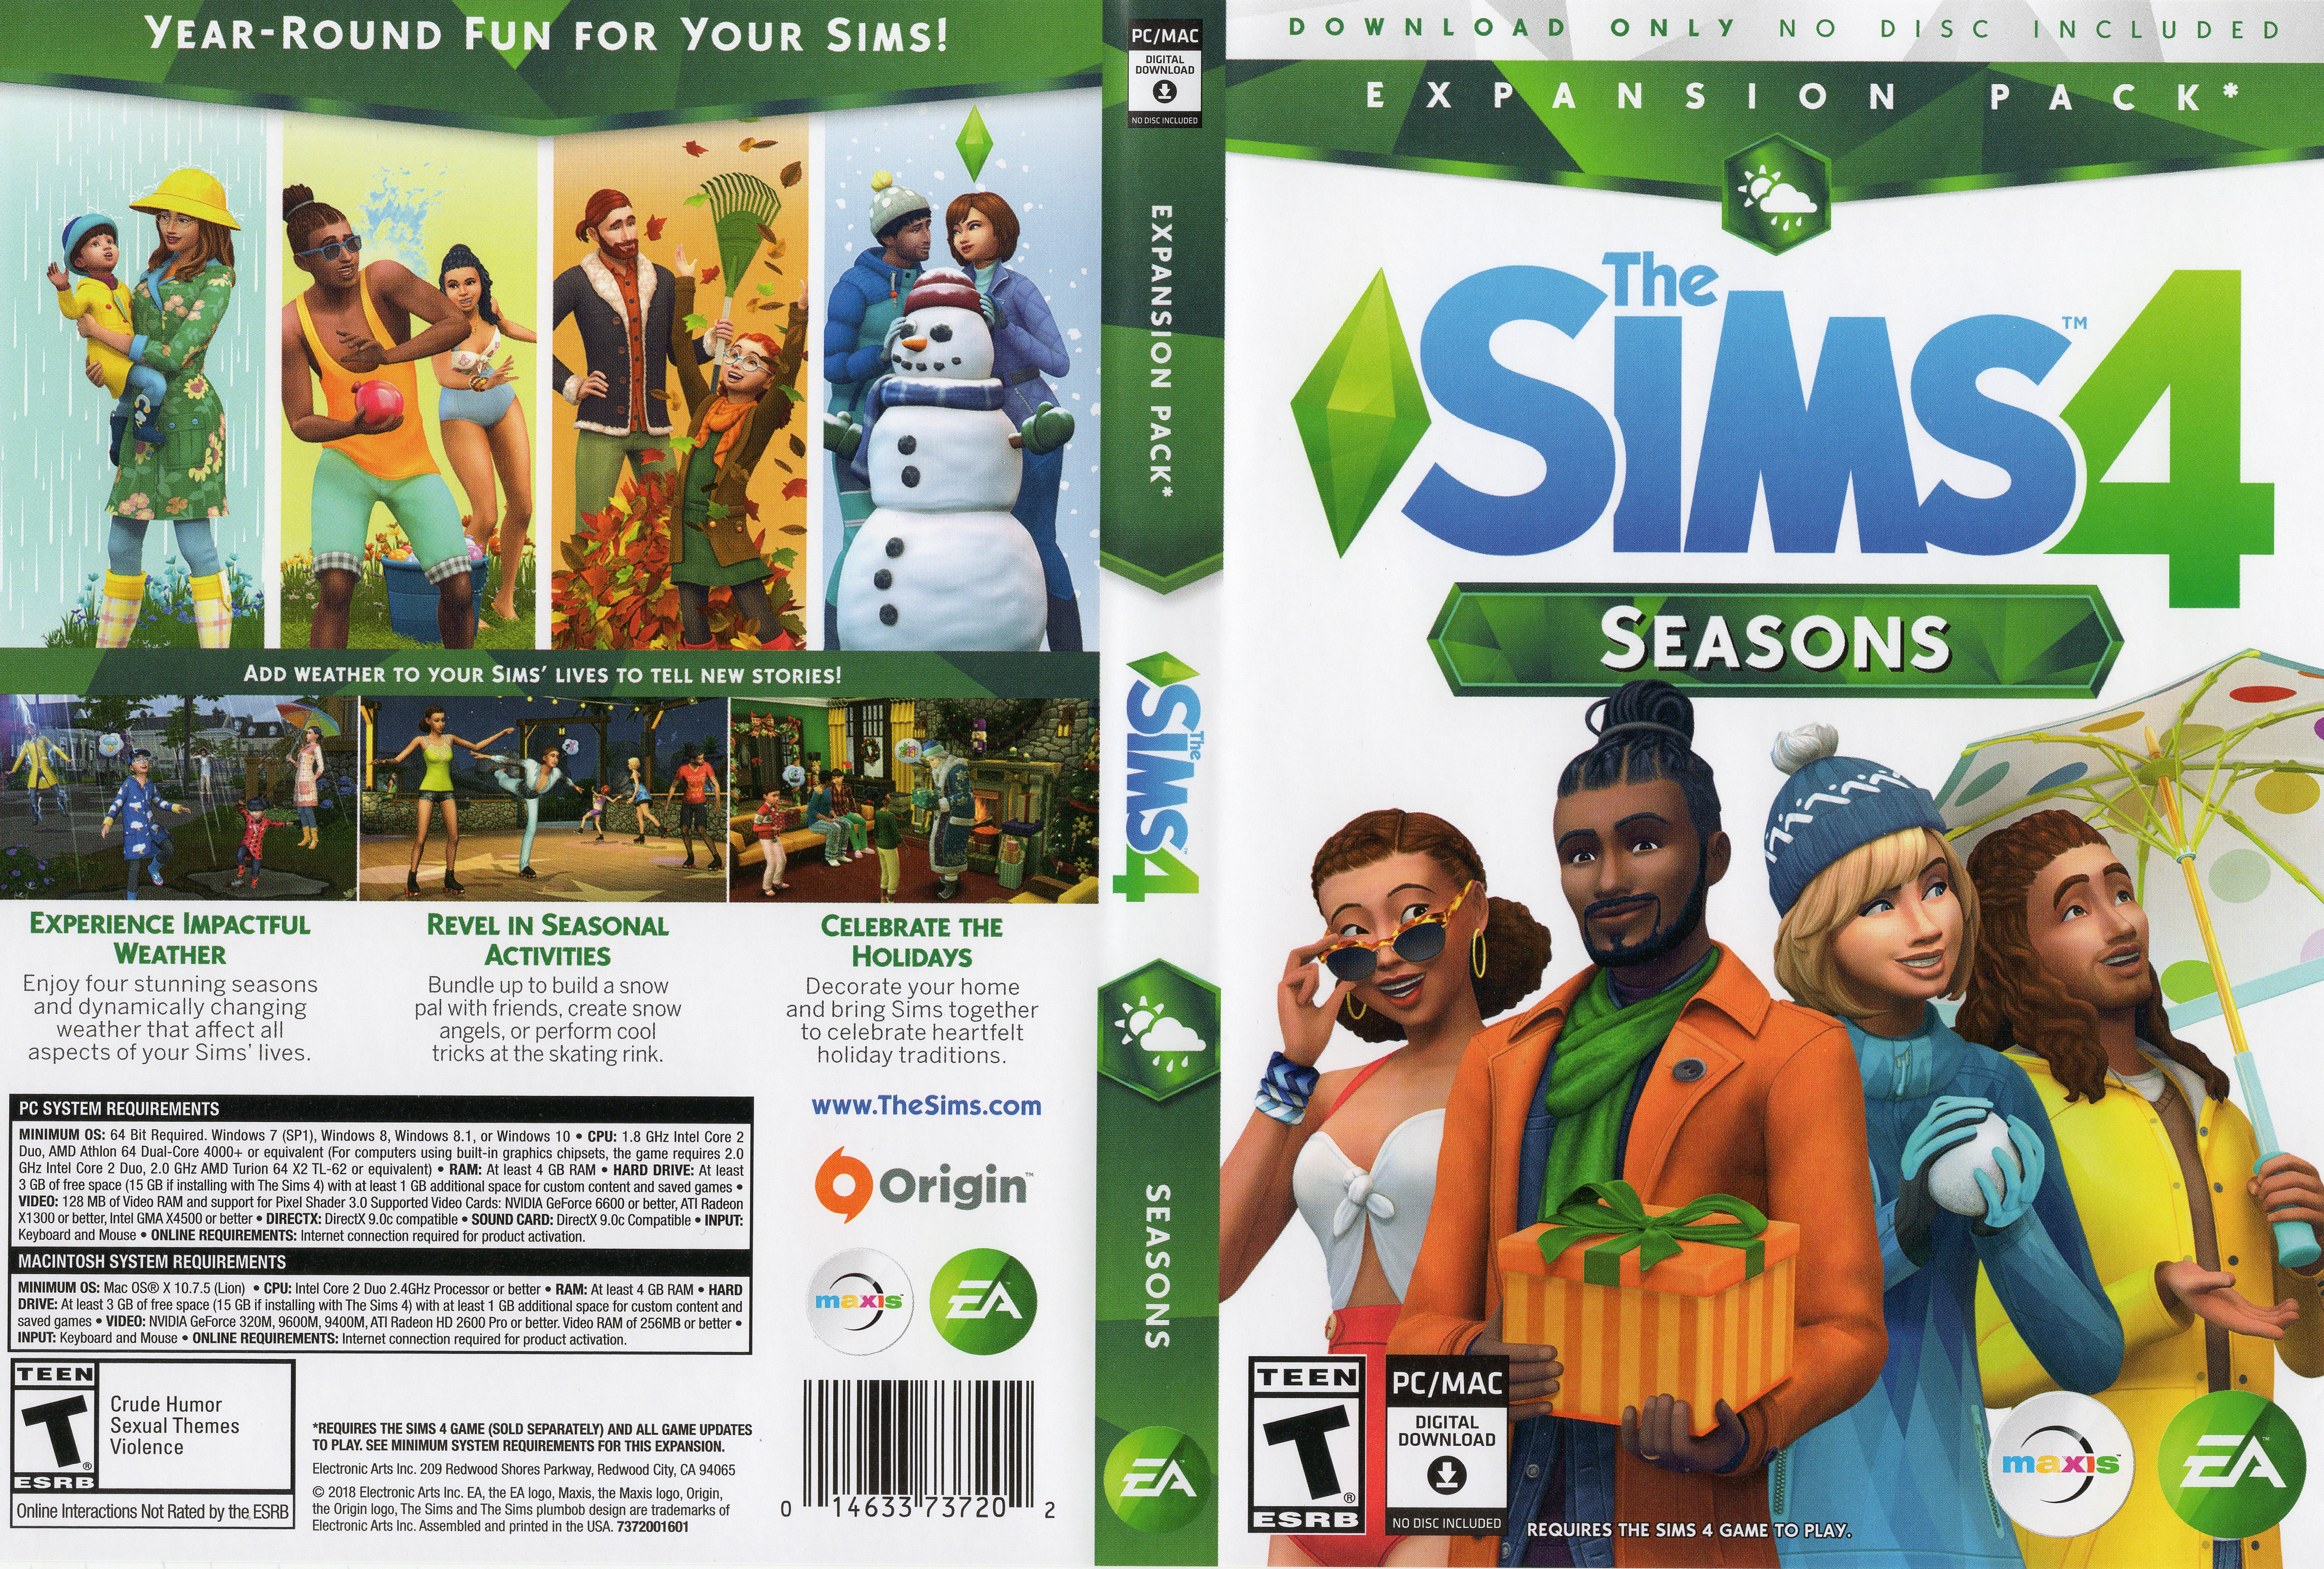 how to download sims 4 seasons on origin